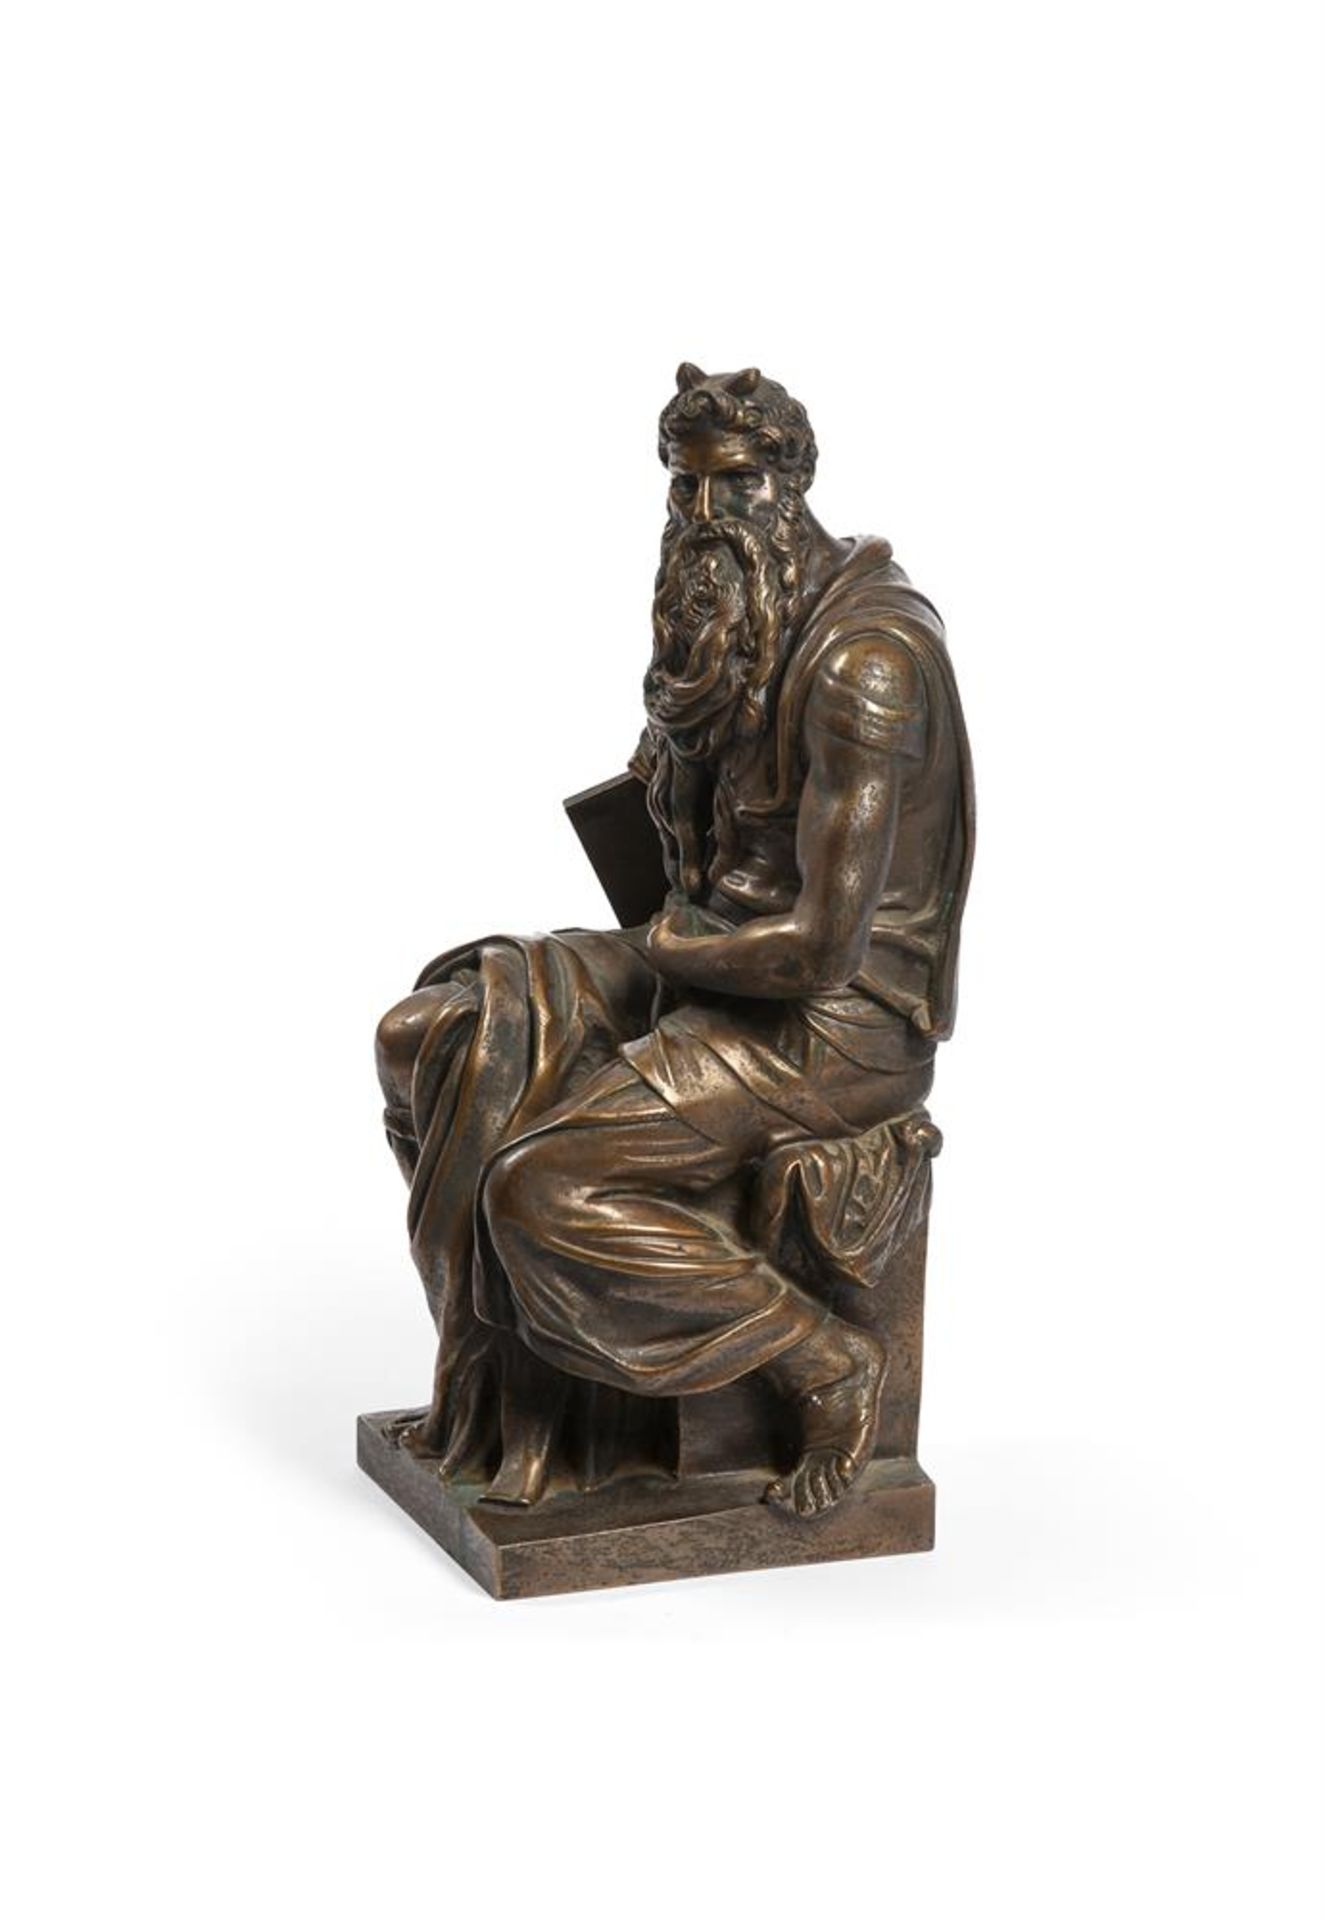 AFTER MICHELANGELO (1475-1564), A BRONZE FIGURE OF MOSES - Image 3 of 5